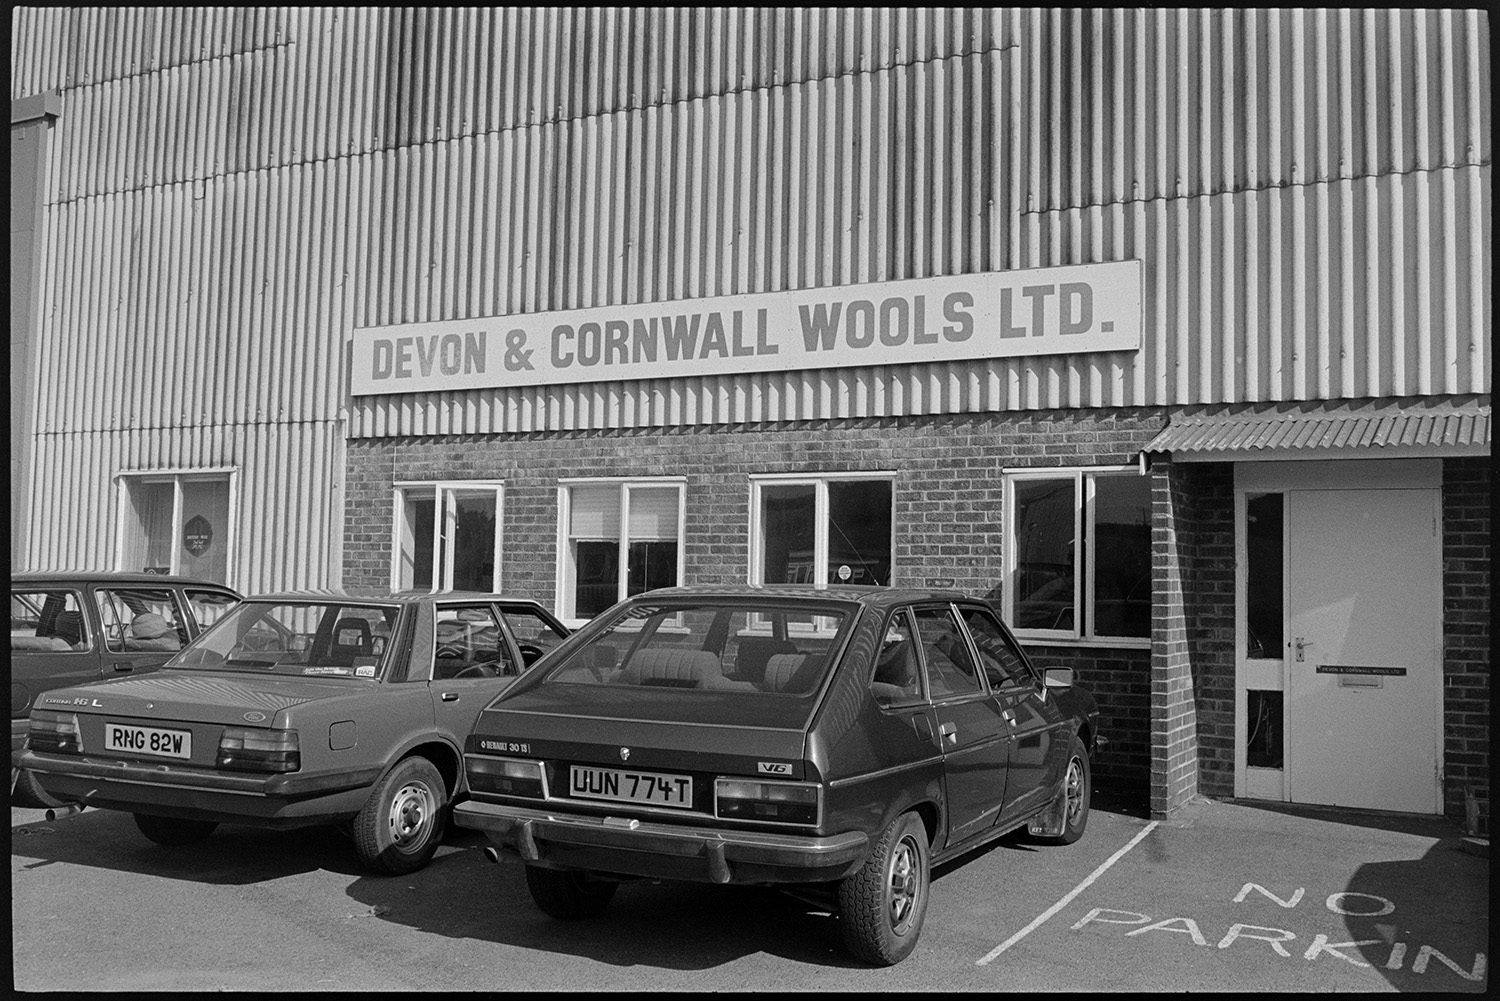 Front of wool merchants warehouse with sign.
[Cars parked outside the warehouse of Devon & Cornwall Wools Ltd at the Pathfields Business Park, South Molton.]